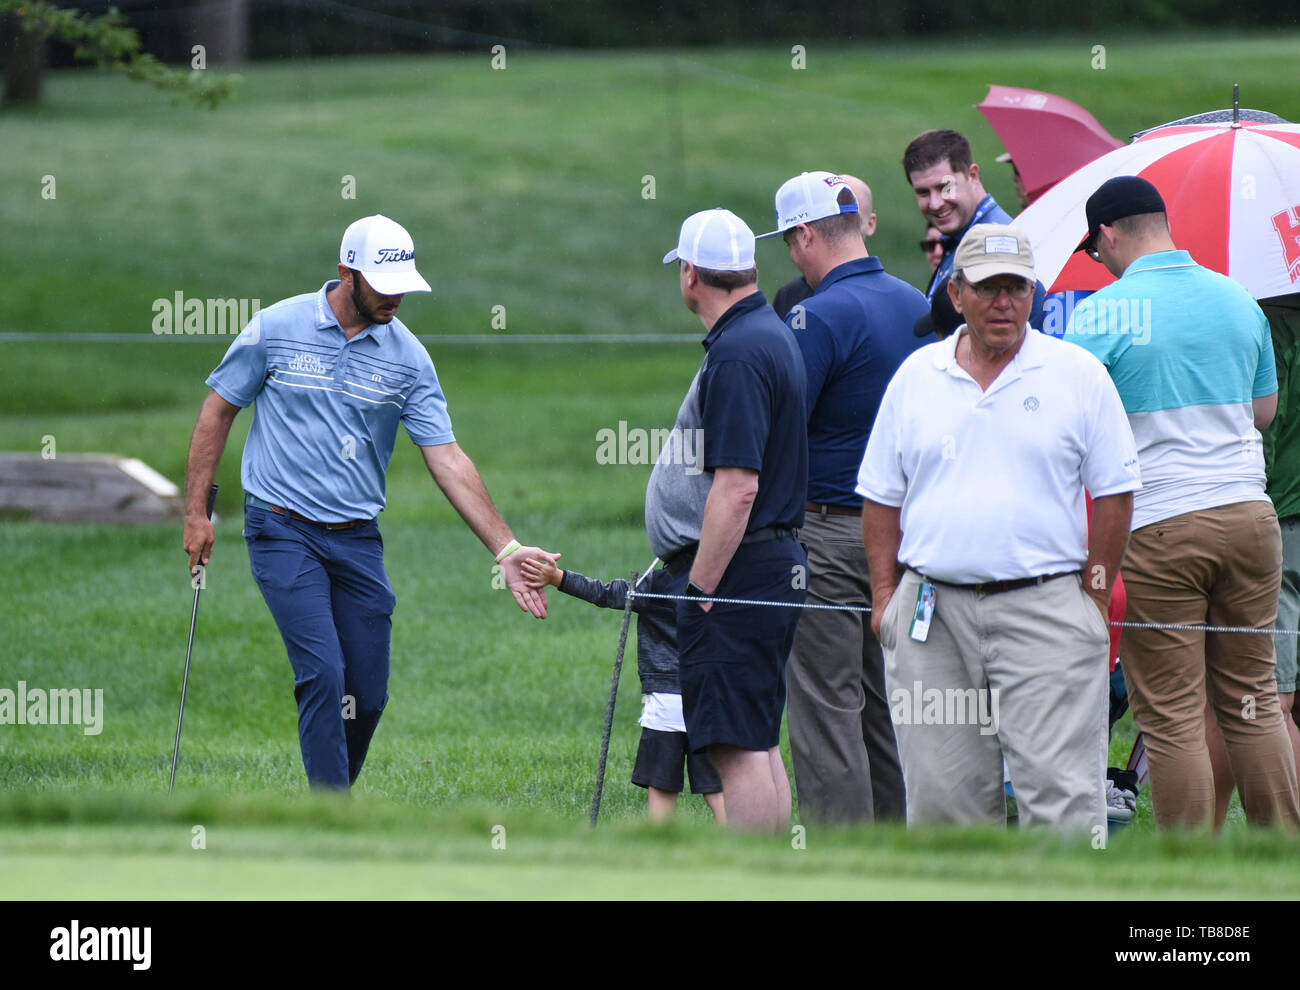 Dublin, OH, USA. 30th May, 2019. Max Homa high-fives a young fan during First Round play at the 2019 Memorial Day Tournament presented by Nationwide at Muirfield Village Golf Club in Dublin, OH. Austyn McFadden/CSM/Alamy Live News Stock Photo